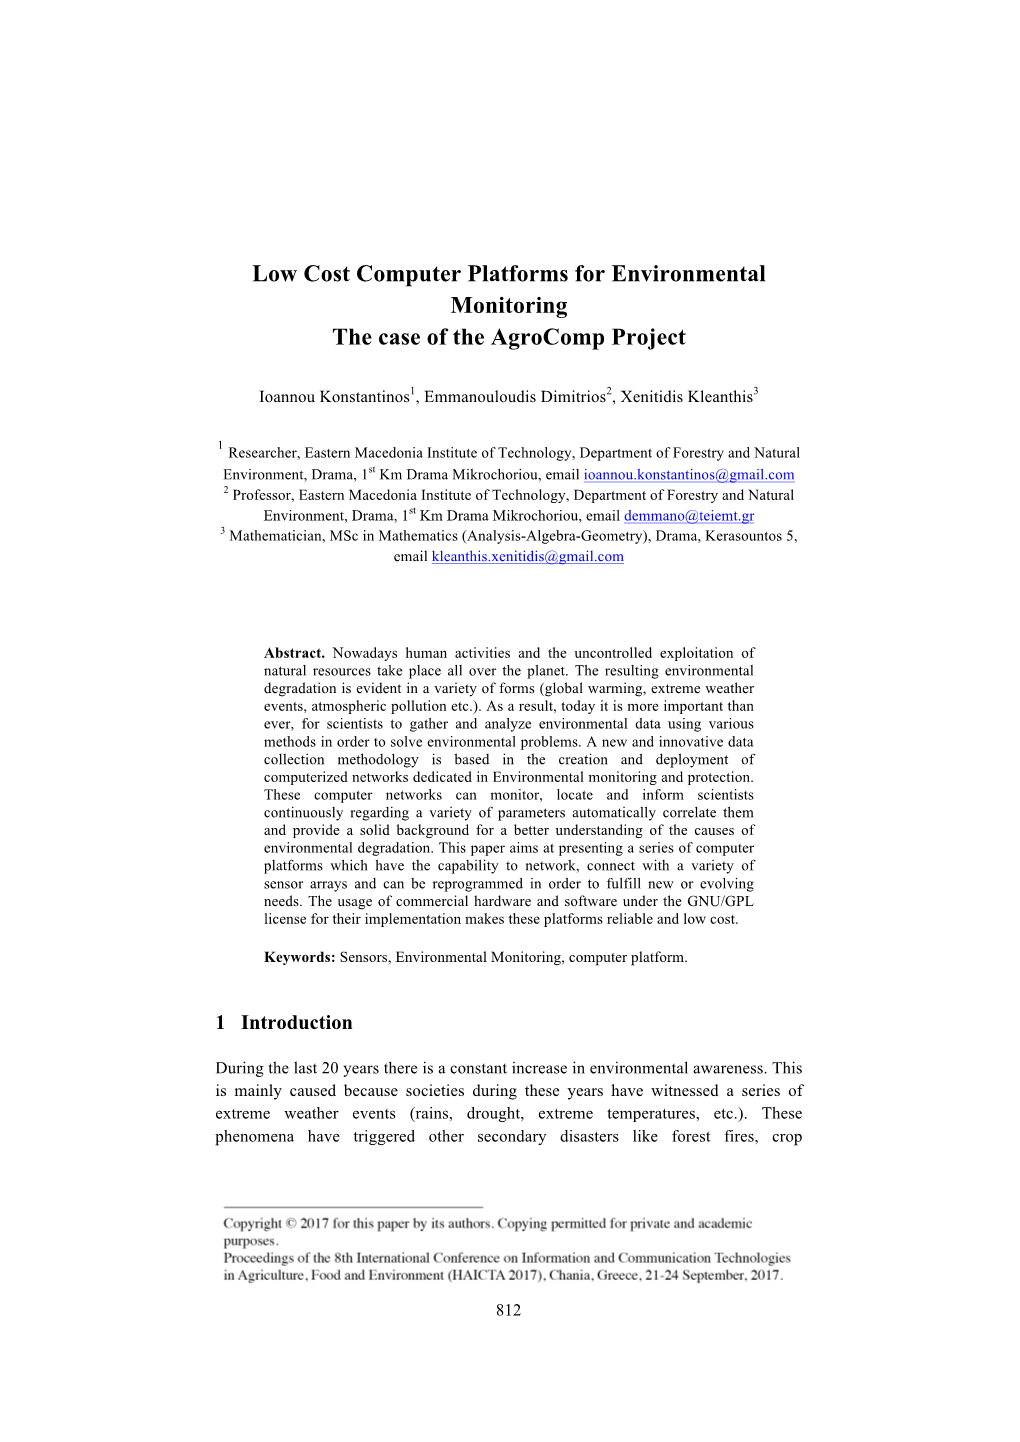 Low Cost Computer Platforms for Environmental Monitoring the Case of the Agrocomp Project